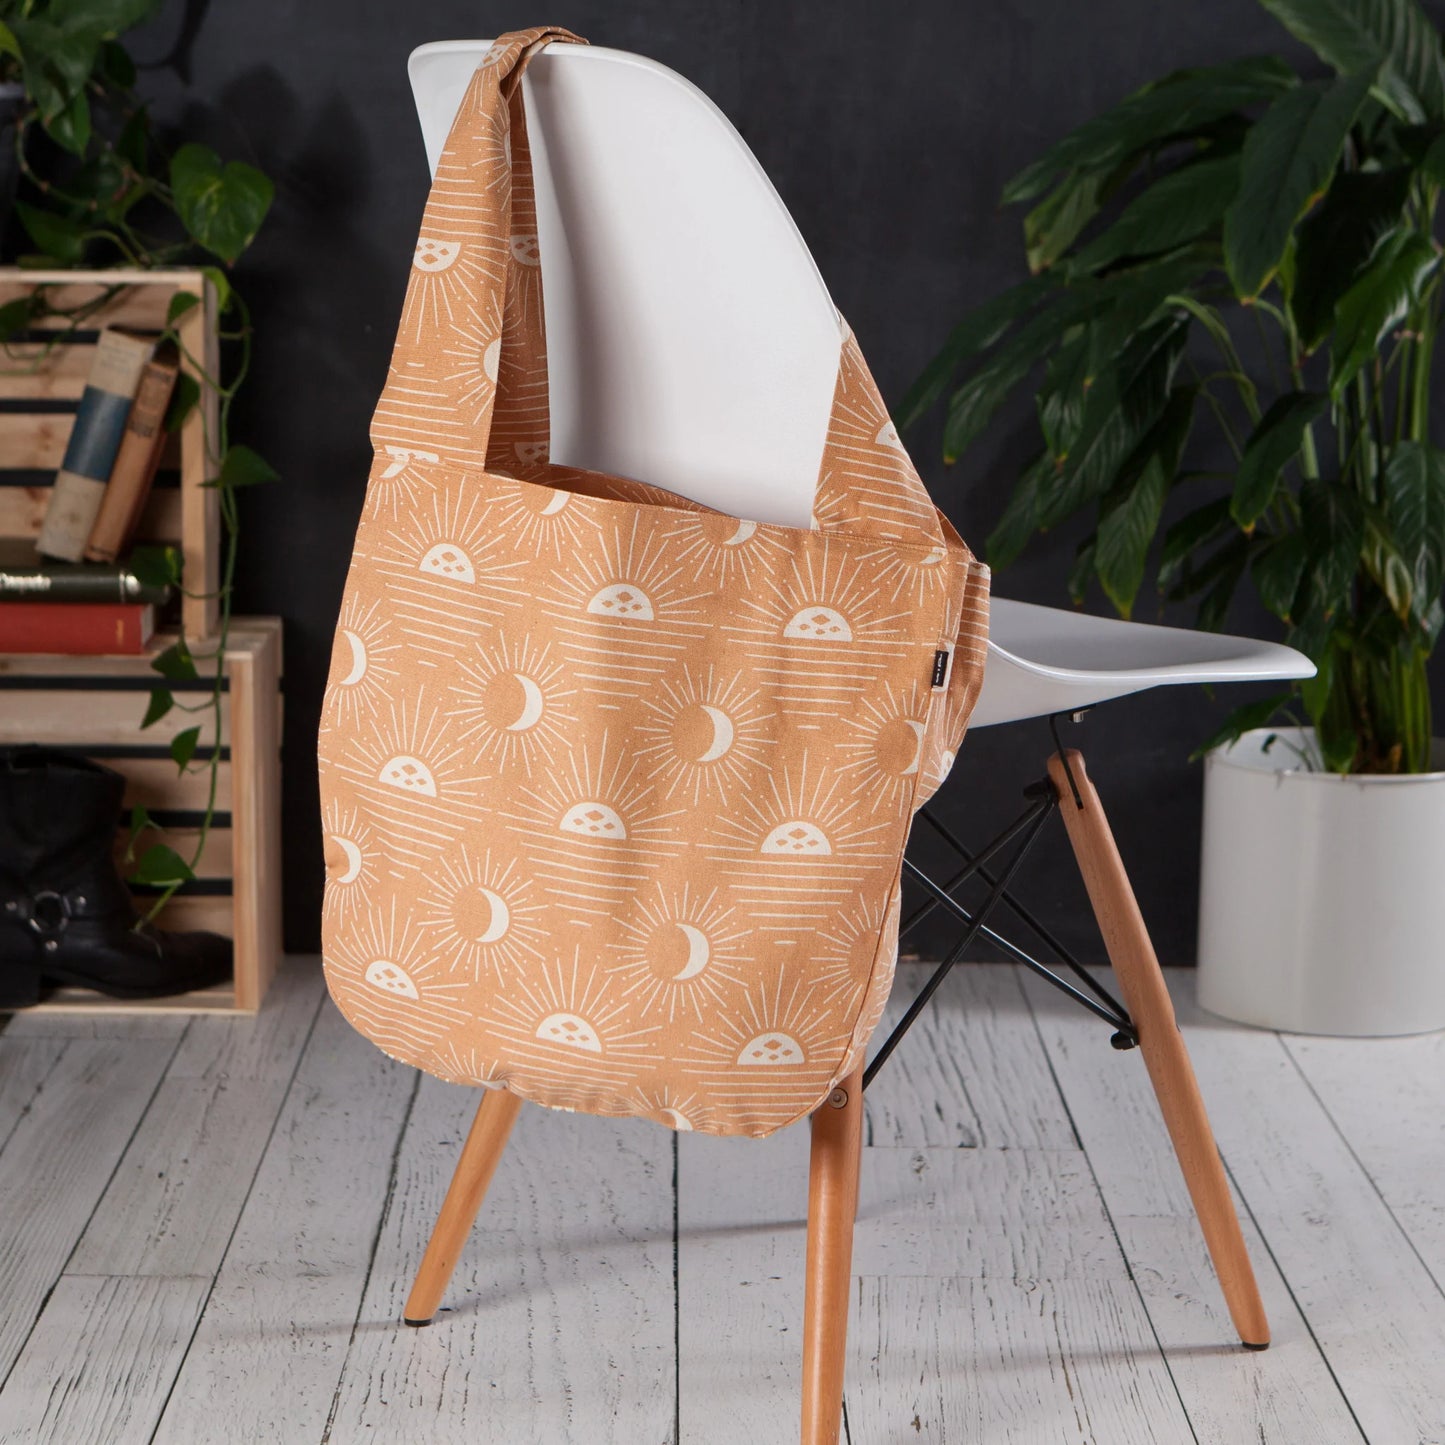 Soleil To and Fro Tote Bag